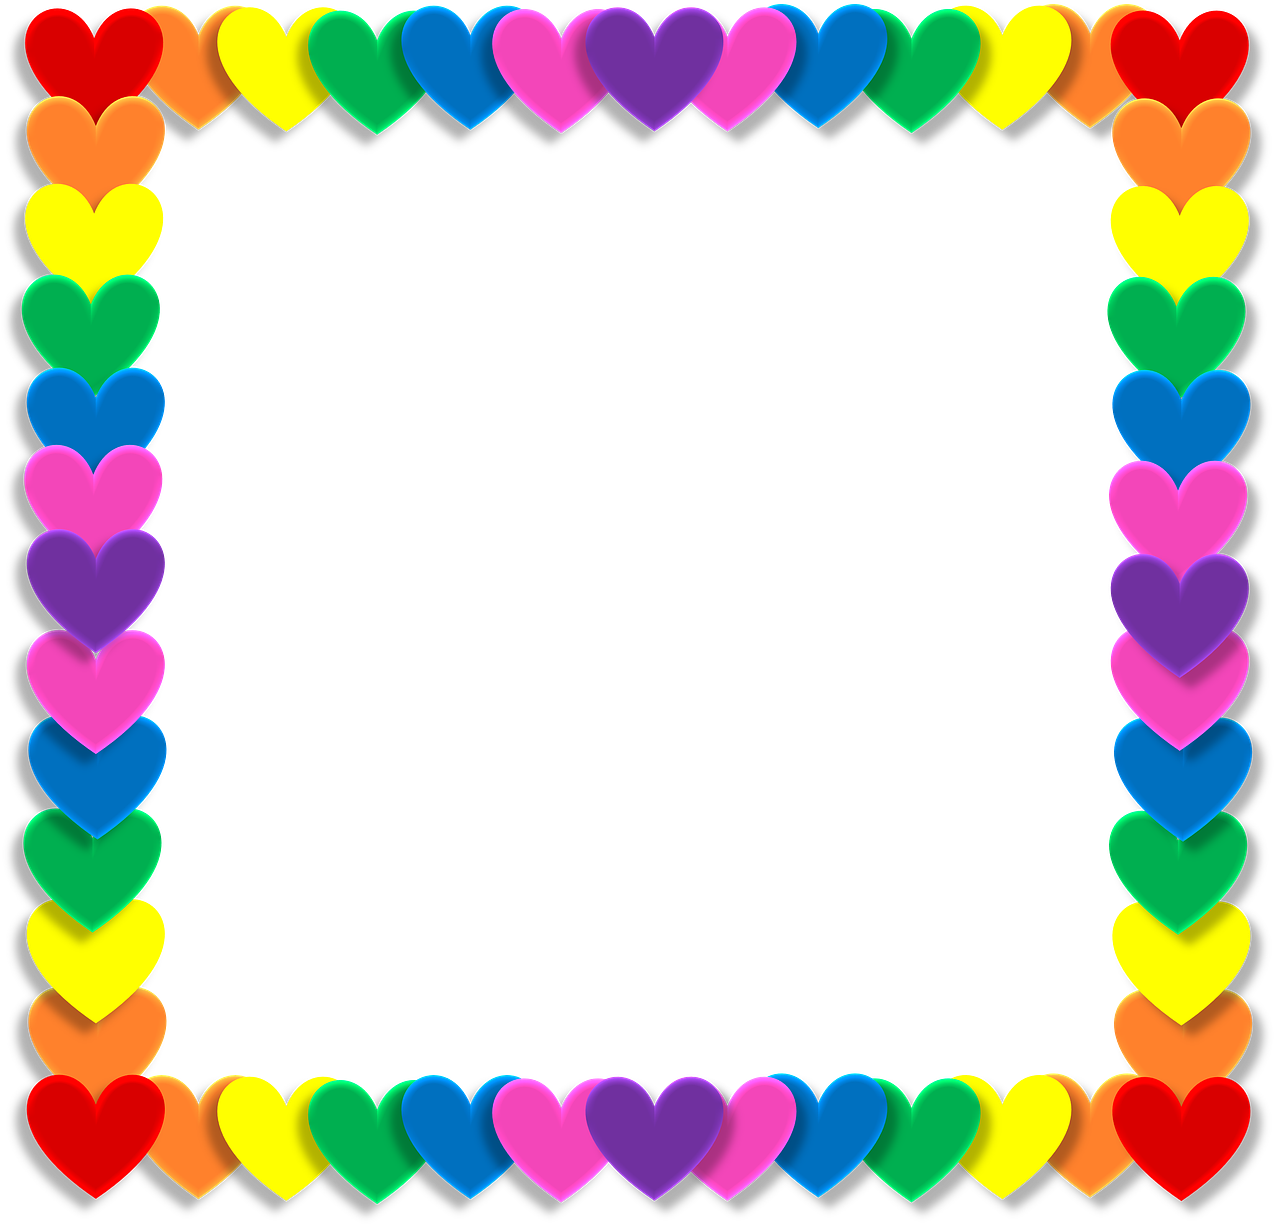 Colorful Hearts Valentine Border PNG